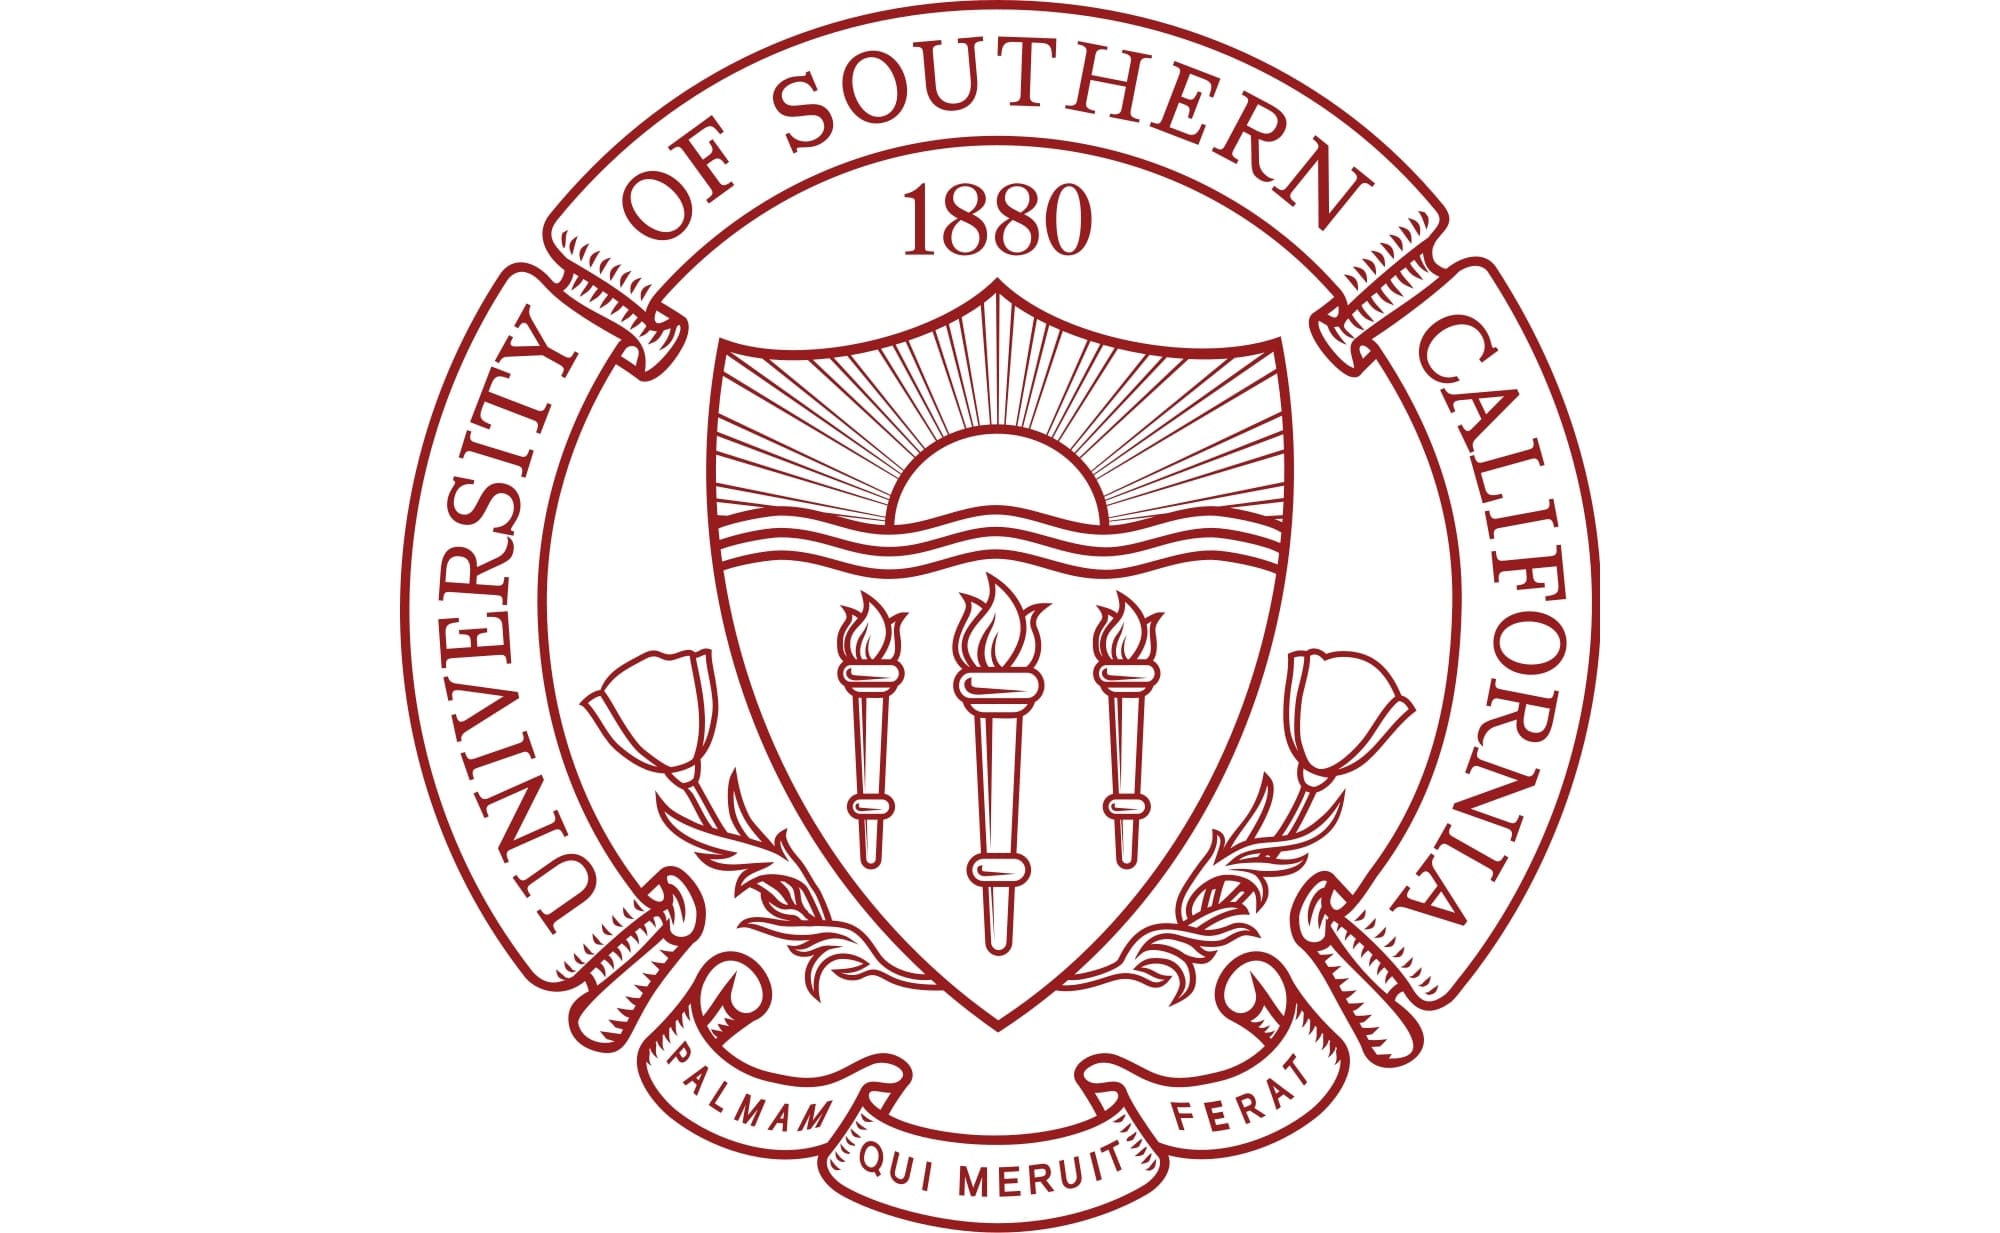 does university of southern california require an essay